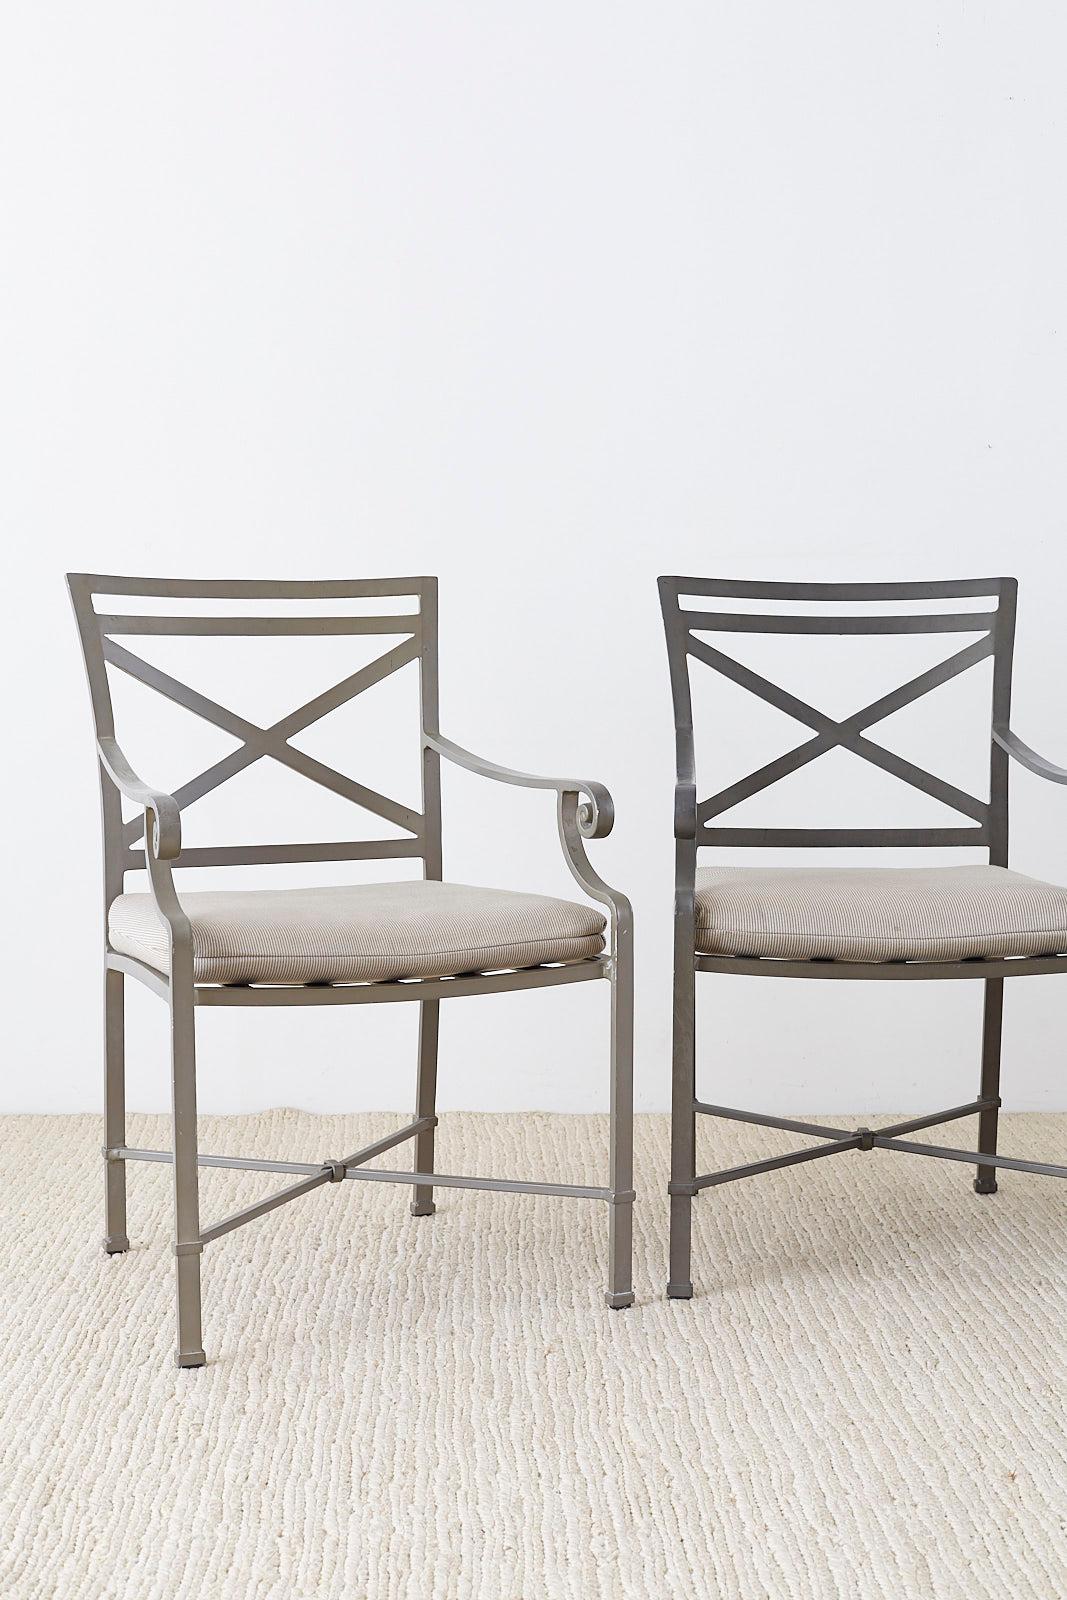 Powder coated set of four Brown Jordan Venetian armchairs for the patio or garden. Featuring a gray finish with neoclassical styling. Each chair has a square back with an X-motif on the splat and leg stretchers. The arms have a decorative scrolled